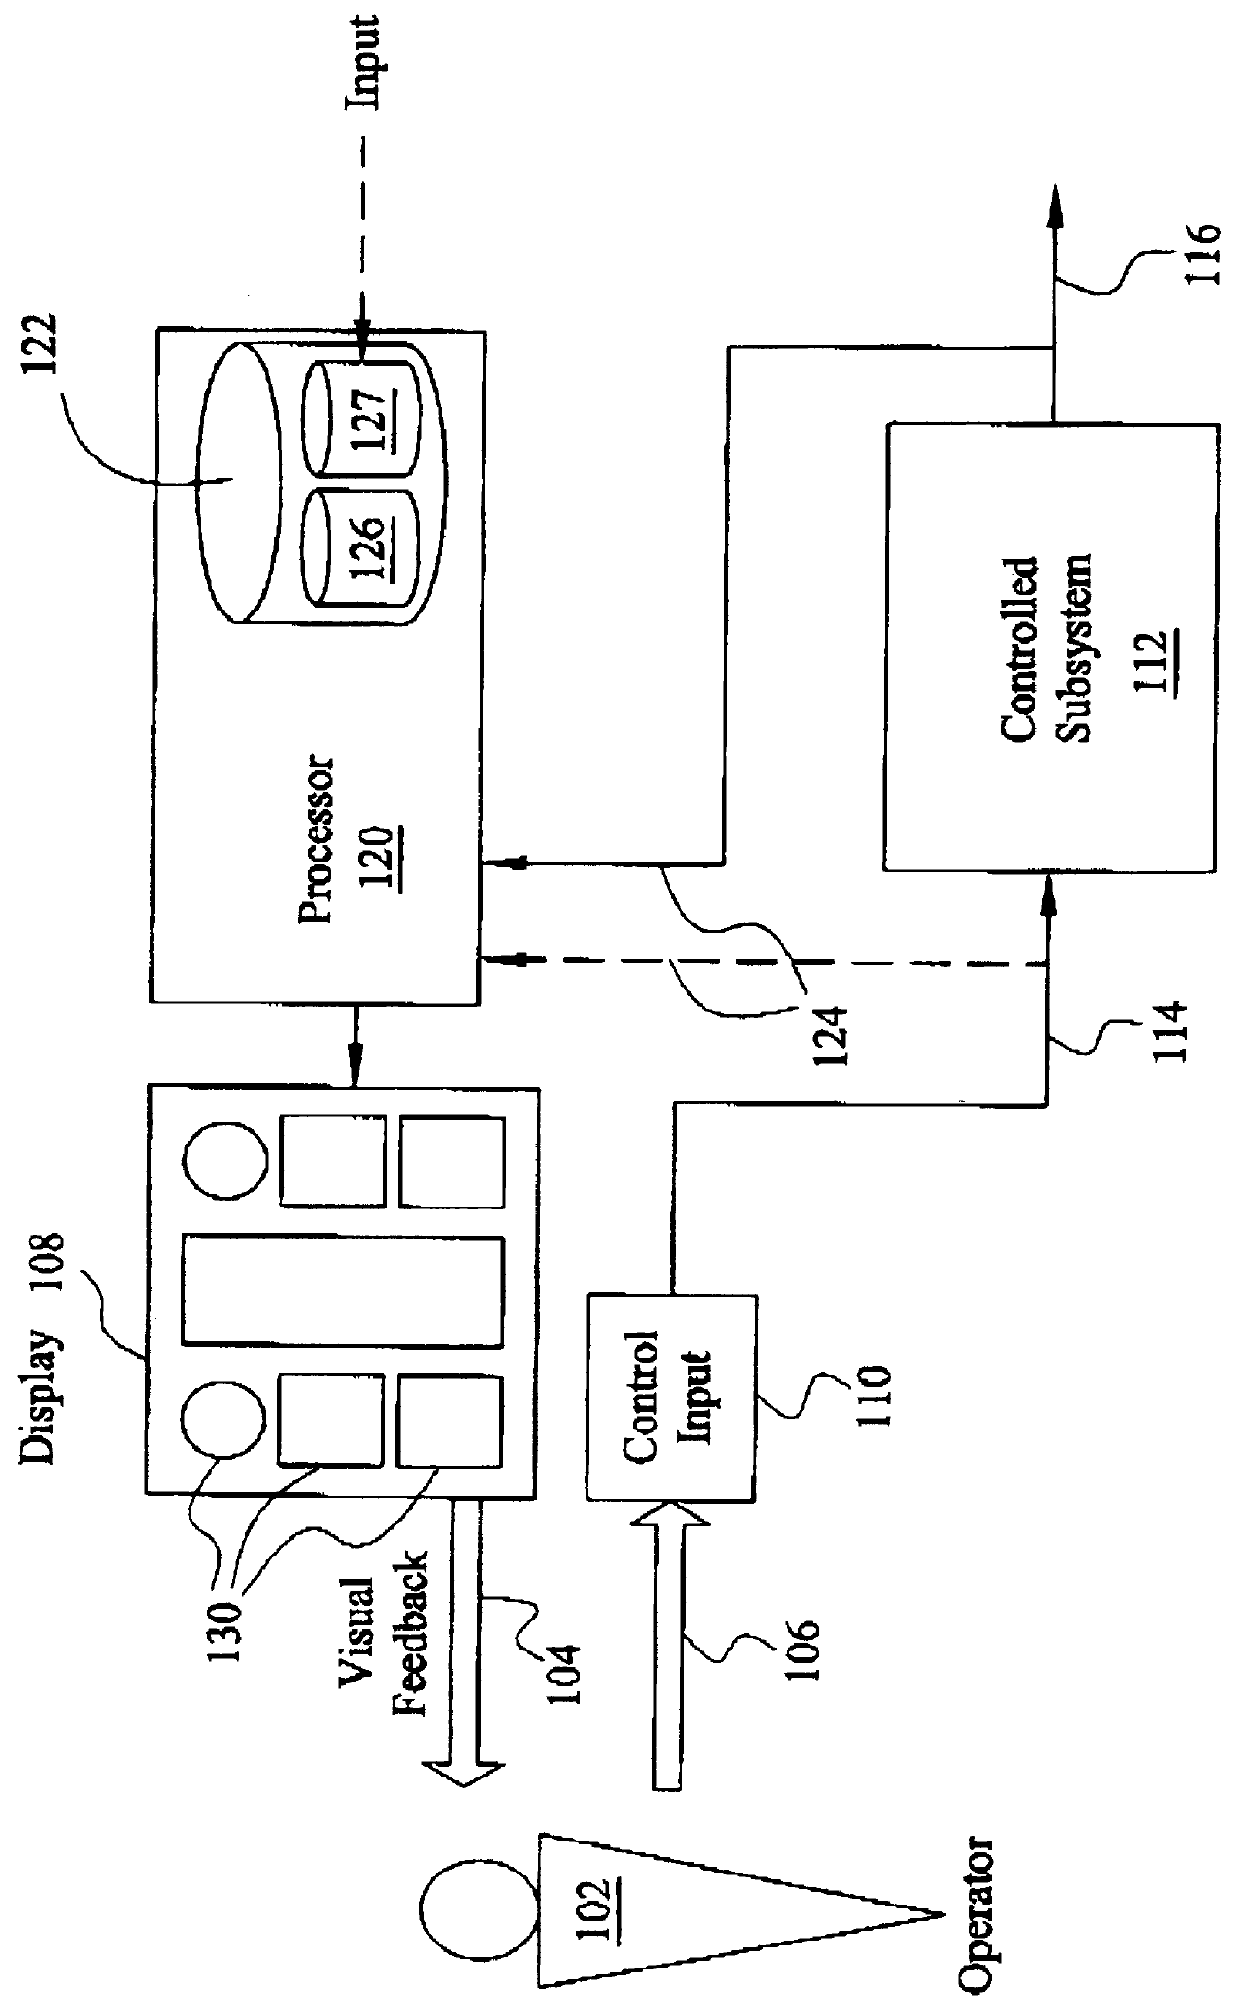 Methods and apparatus for an improved control parameter value indicator